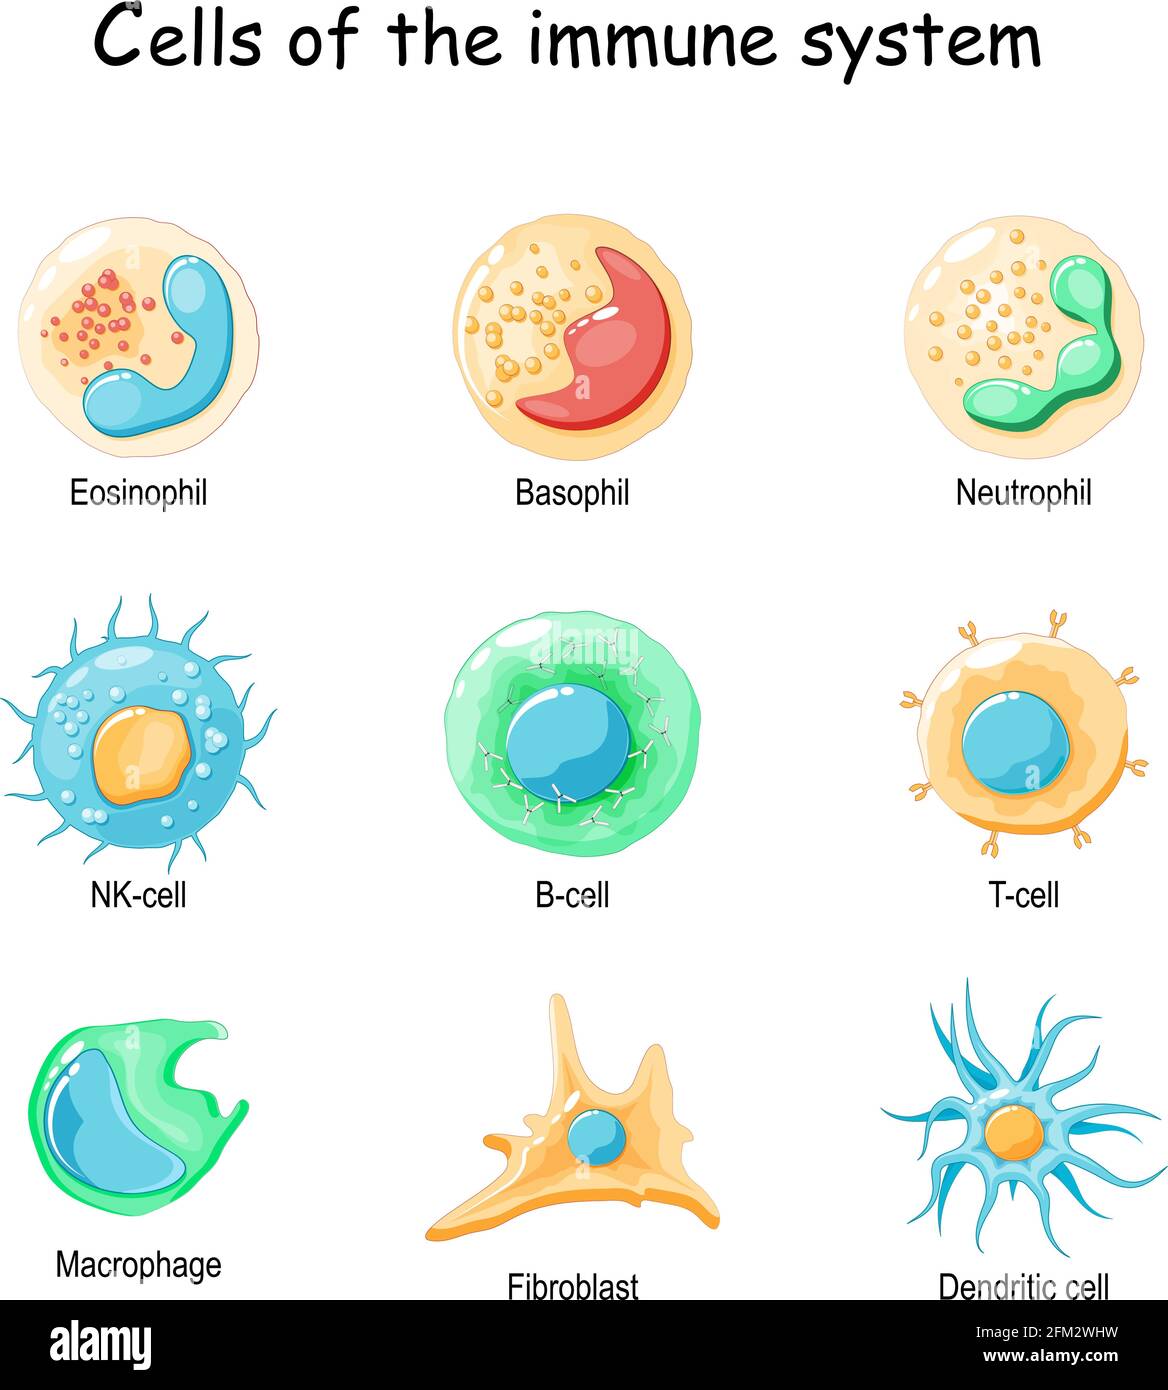 Cells of the immune system. White blood cells or leukocytes: Eosinophil, Neutrophil, Basophil, Macrophage, Fibroblast, and Dendritic cell. Vector Stock Vector